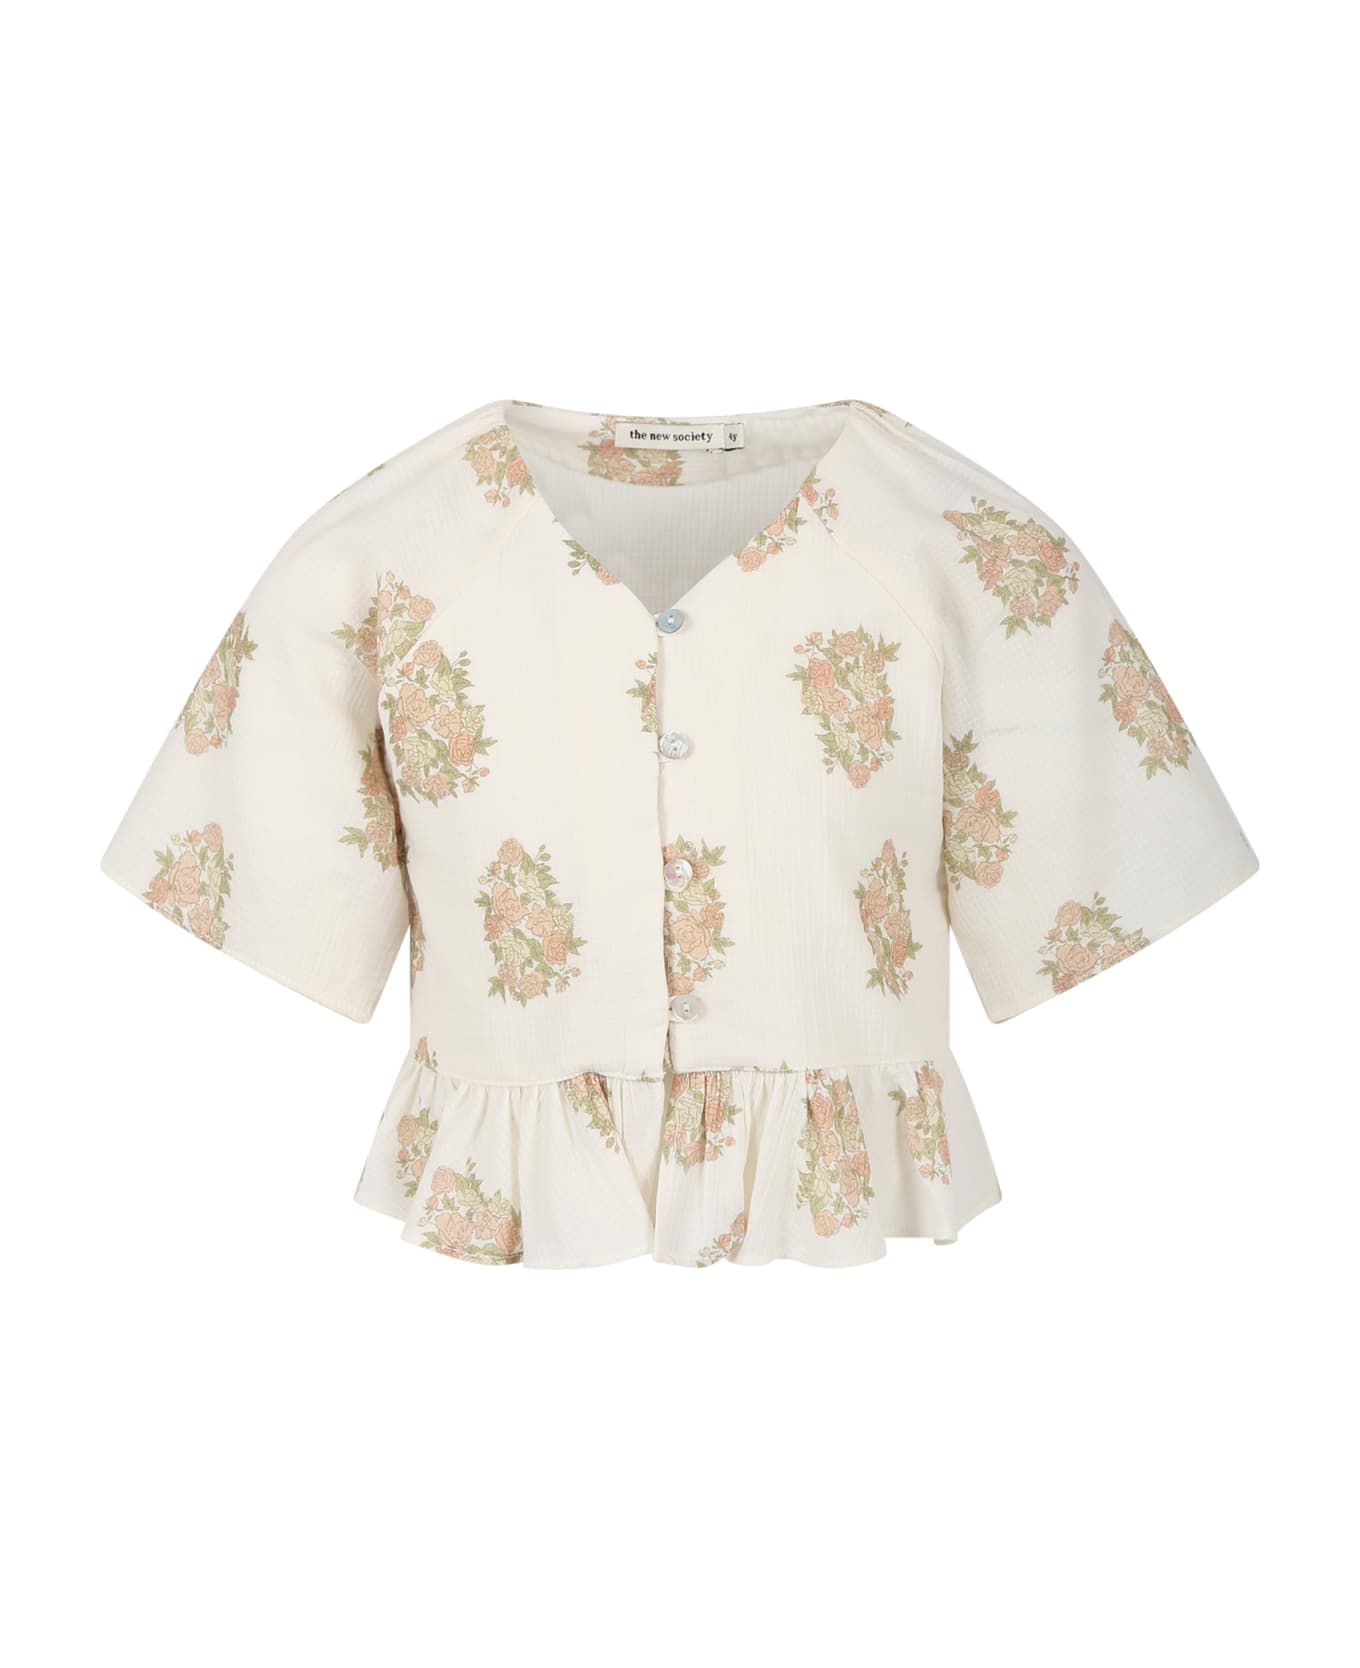 The New Society Ivory Shirt For Girl With Flower Print - Ivory